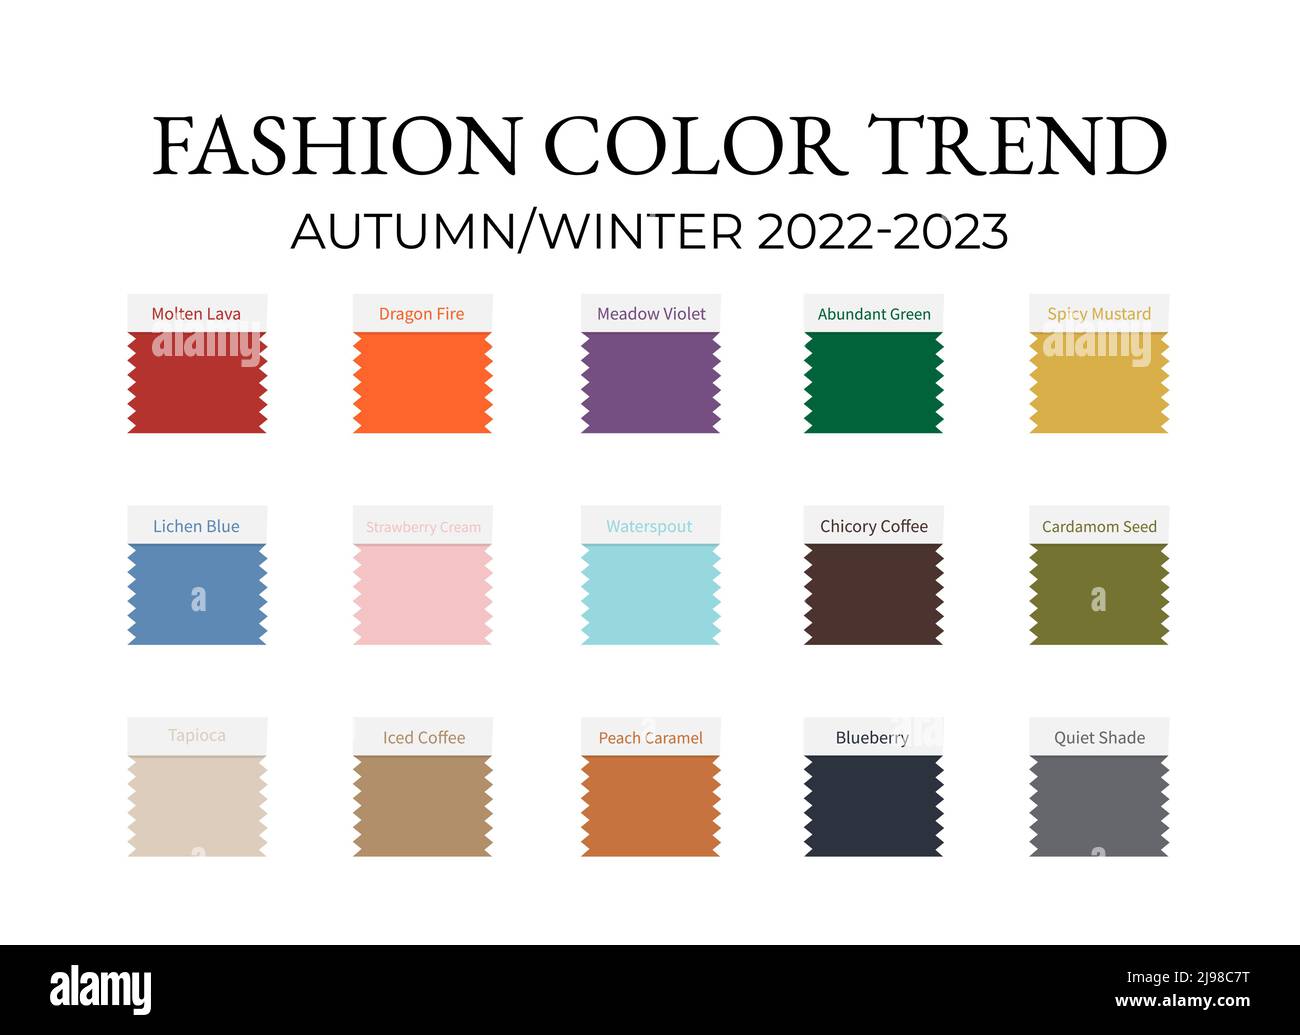 1. "Nail Color Trends for 2024: What Shades Will Be Popular?" - wide 11